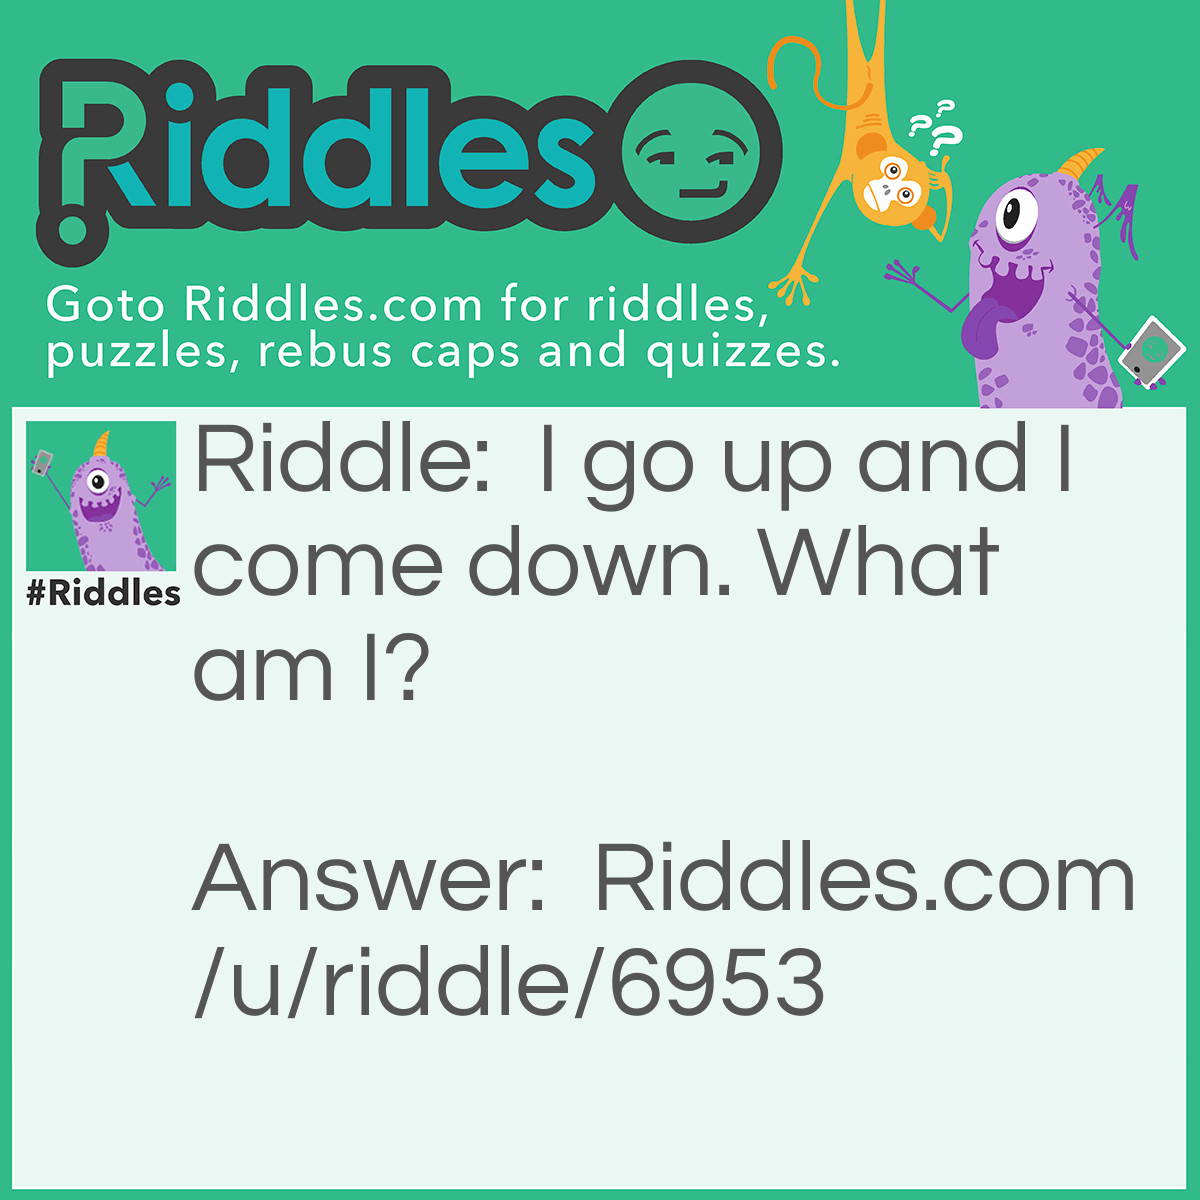 Riddle: I go up and I come down. What am I? Answer: Stairs.